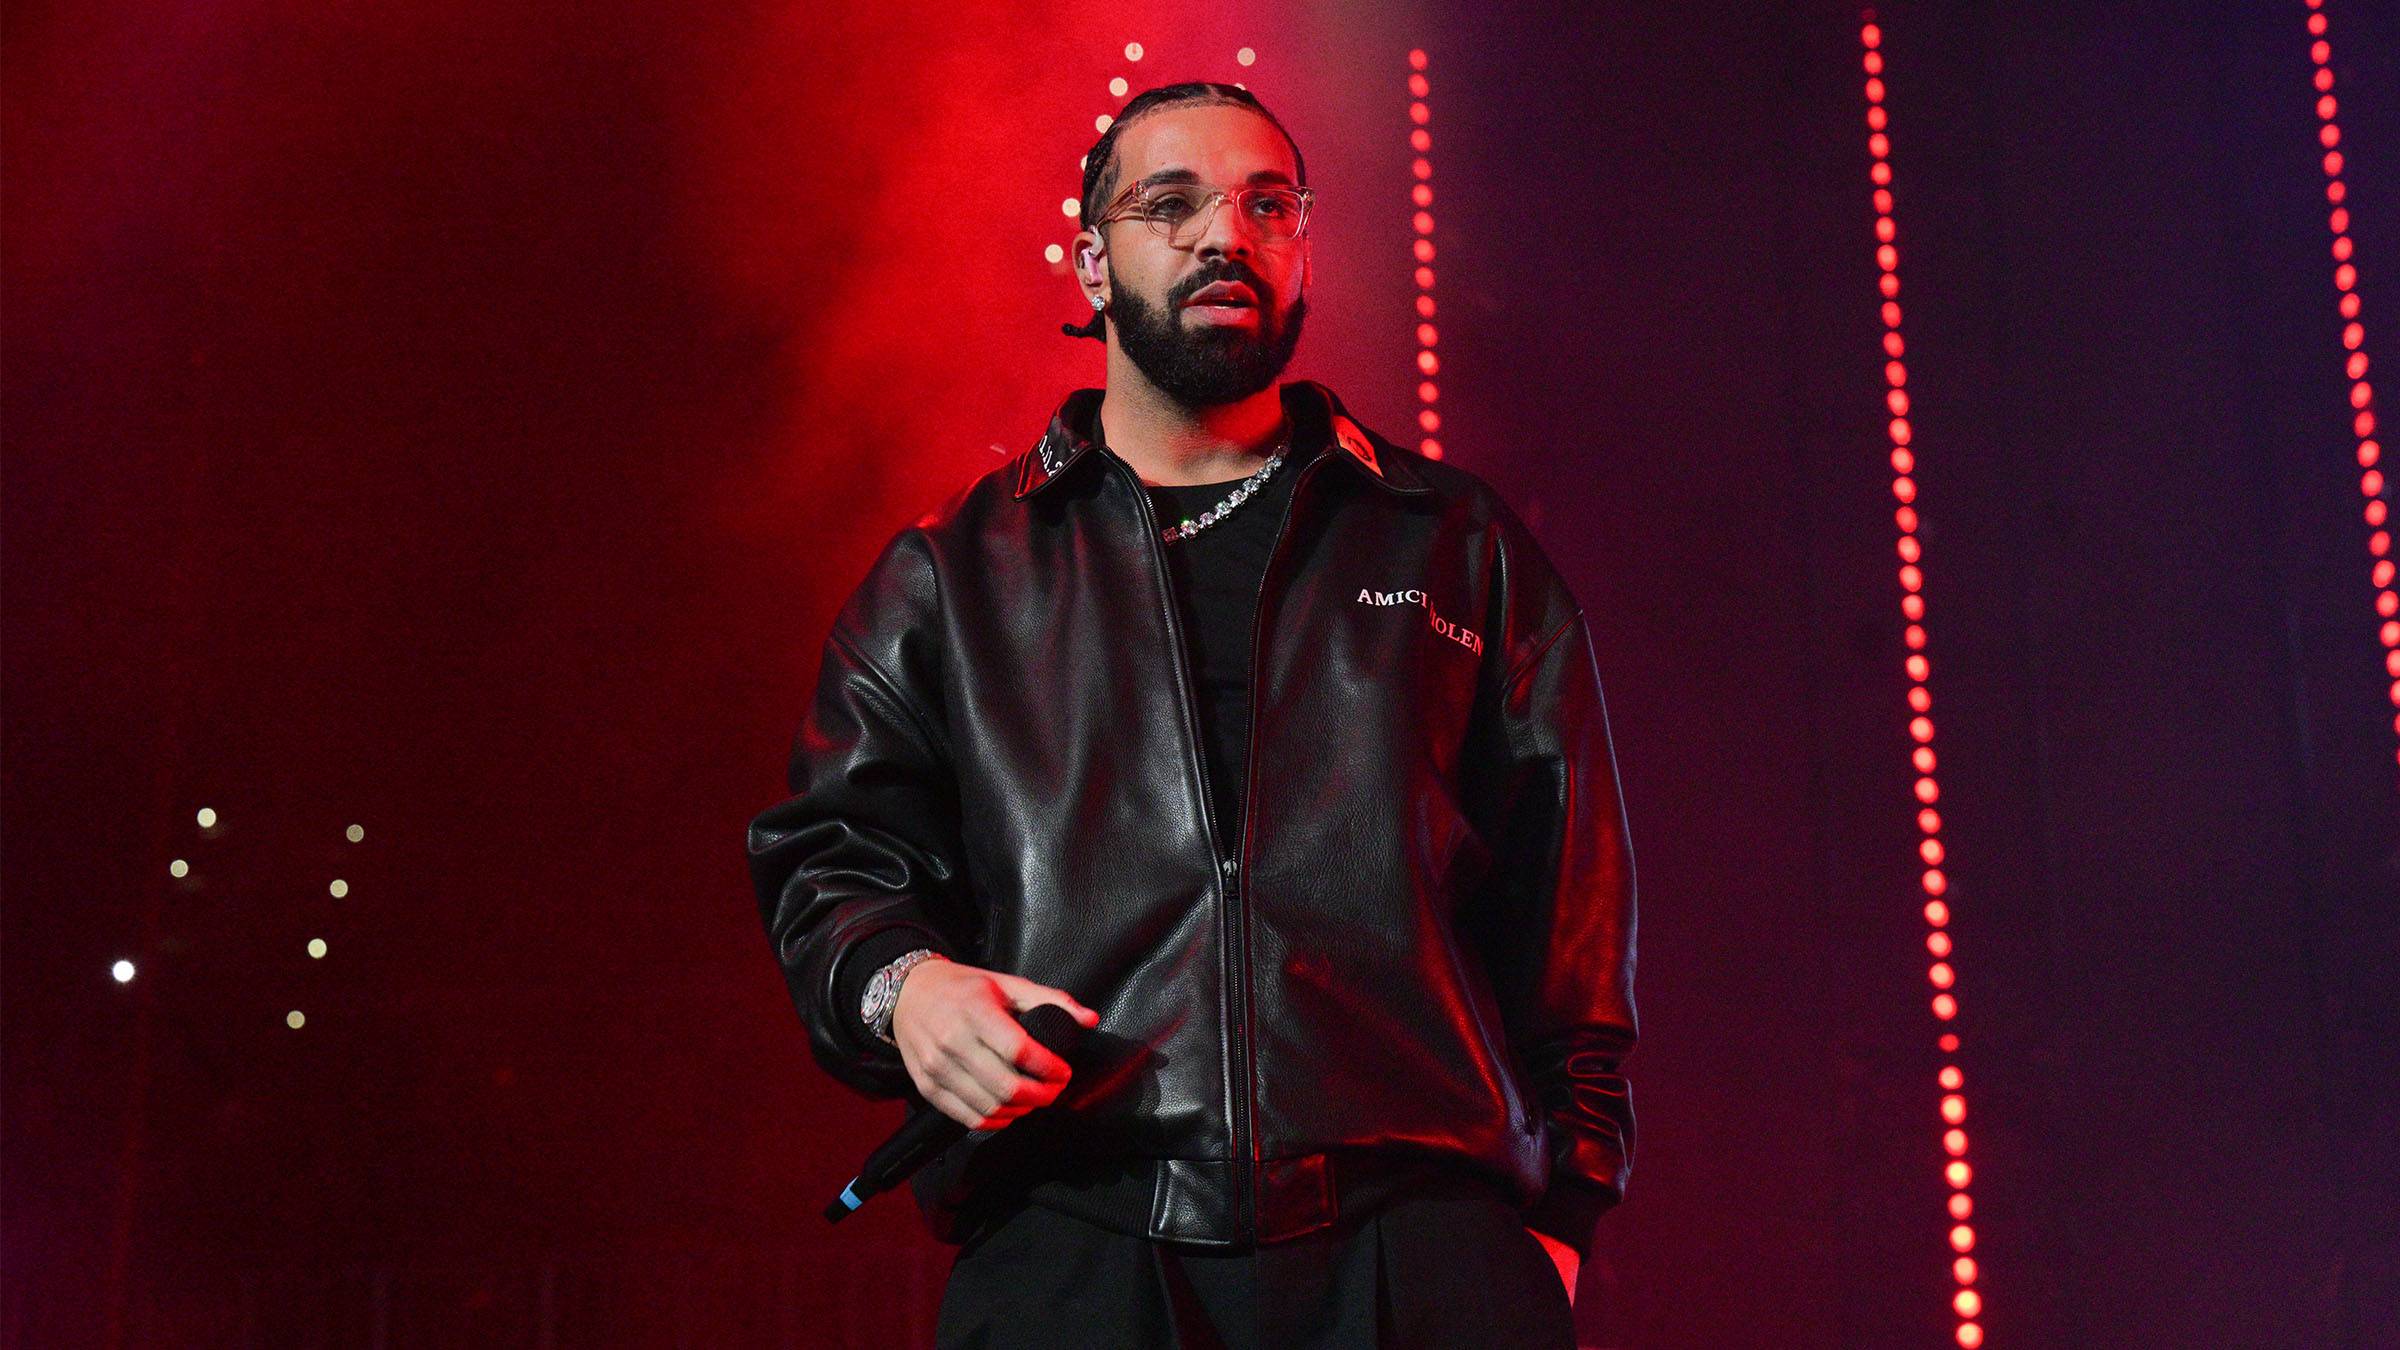 Girl who threw her 36 G bra at #Drake at his show, reveals herself